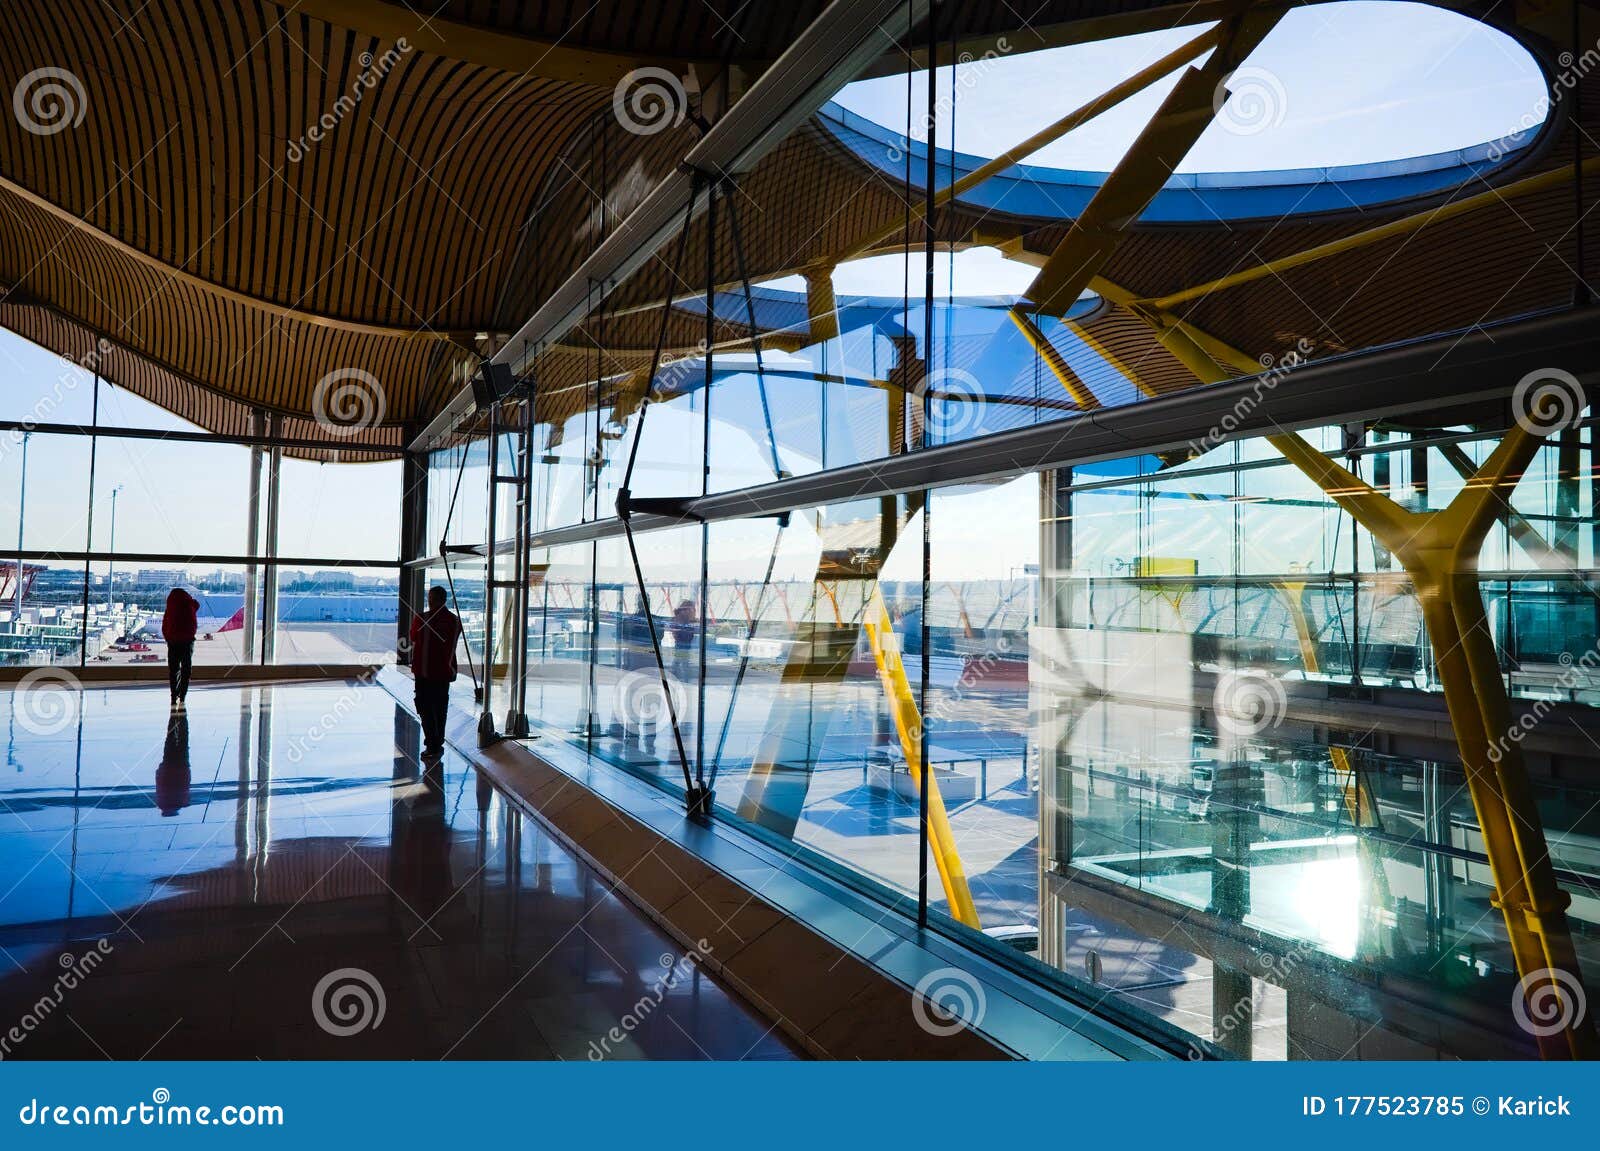 interior view of the madrid barajas international airport with glass windows